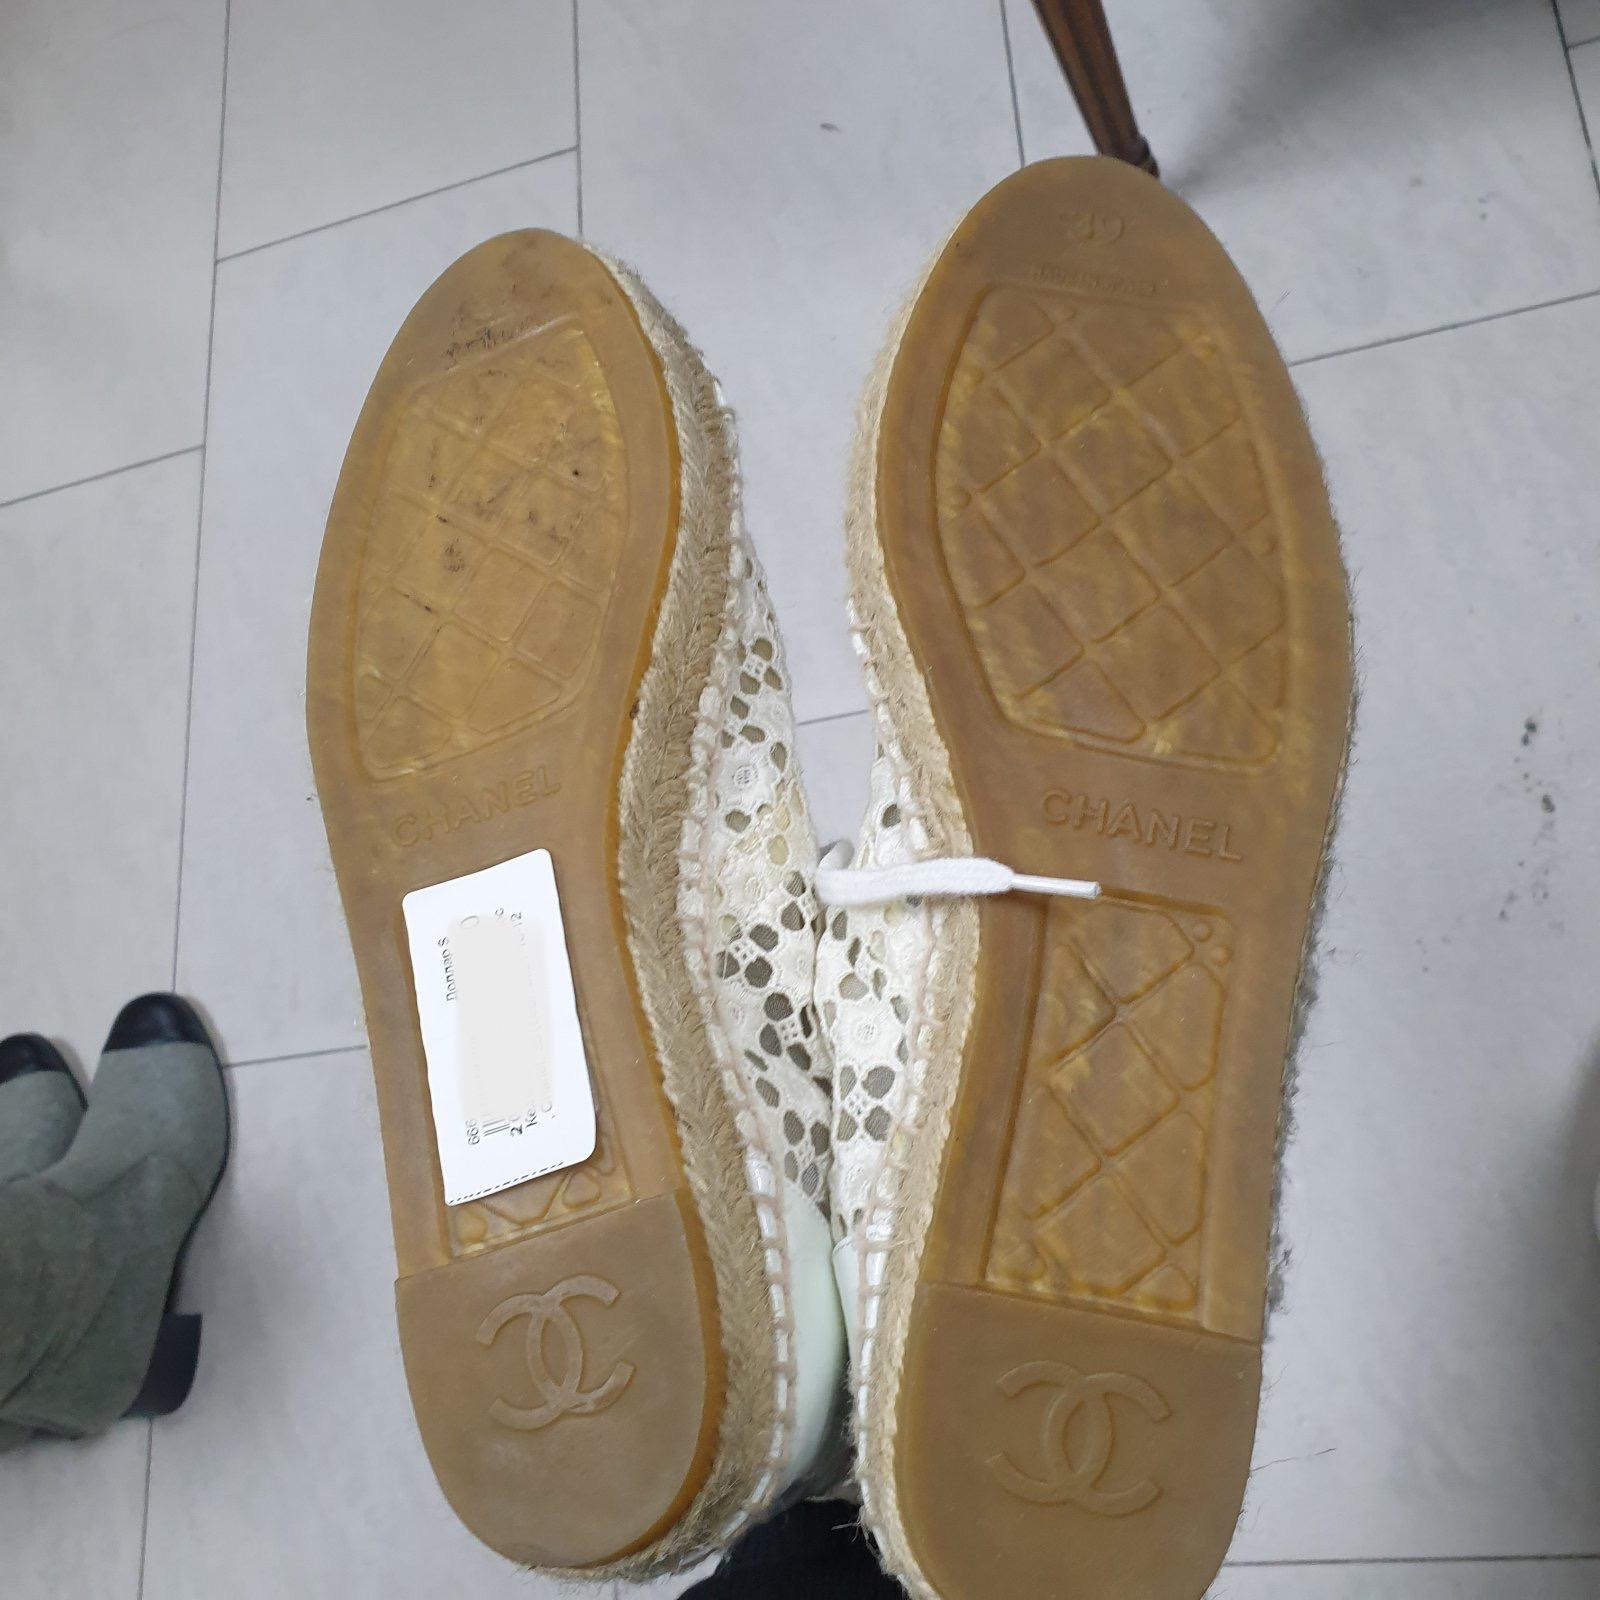 Chanel Cc Patent Leather Trimmed Crochet Espadrilles In Good Condition For Sale In Krakow, PL